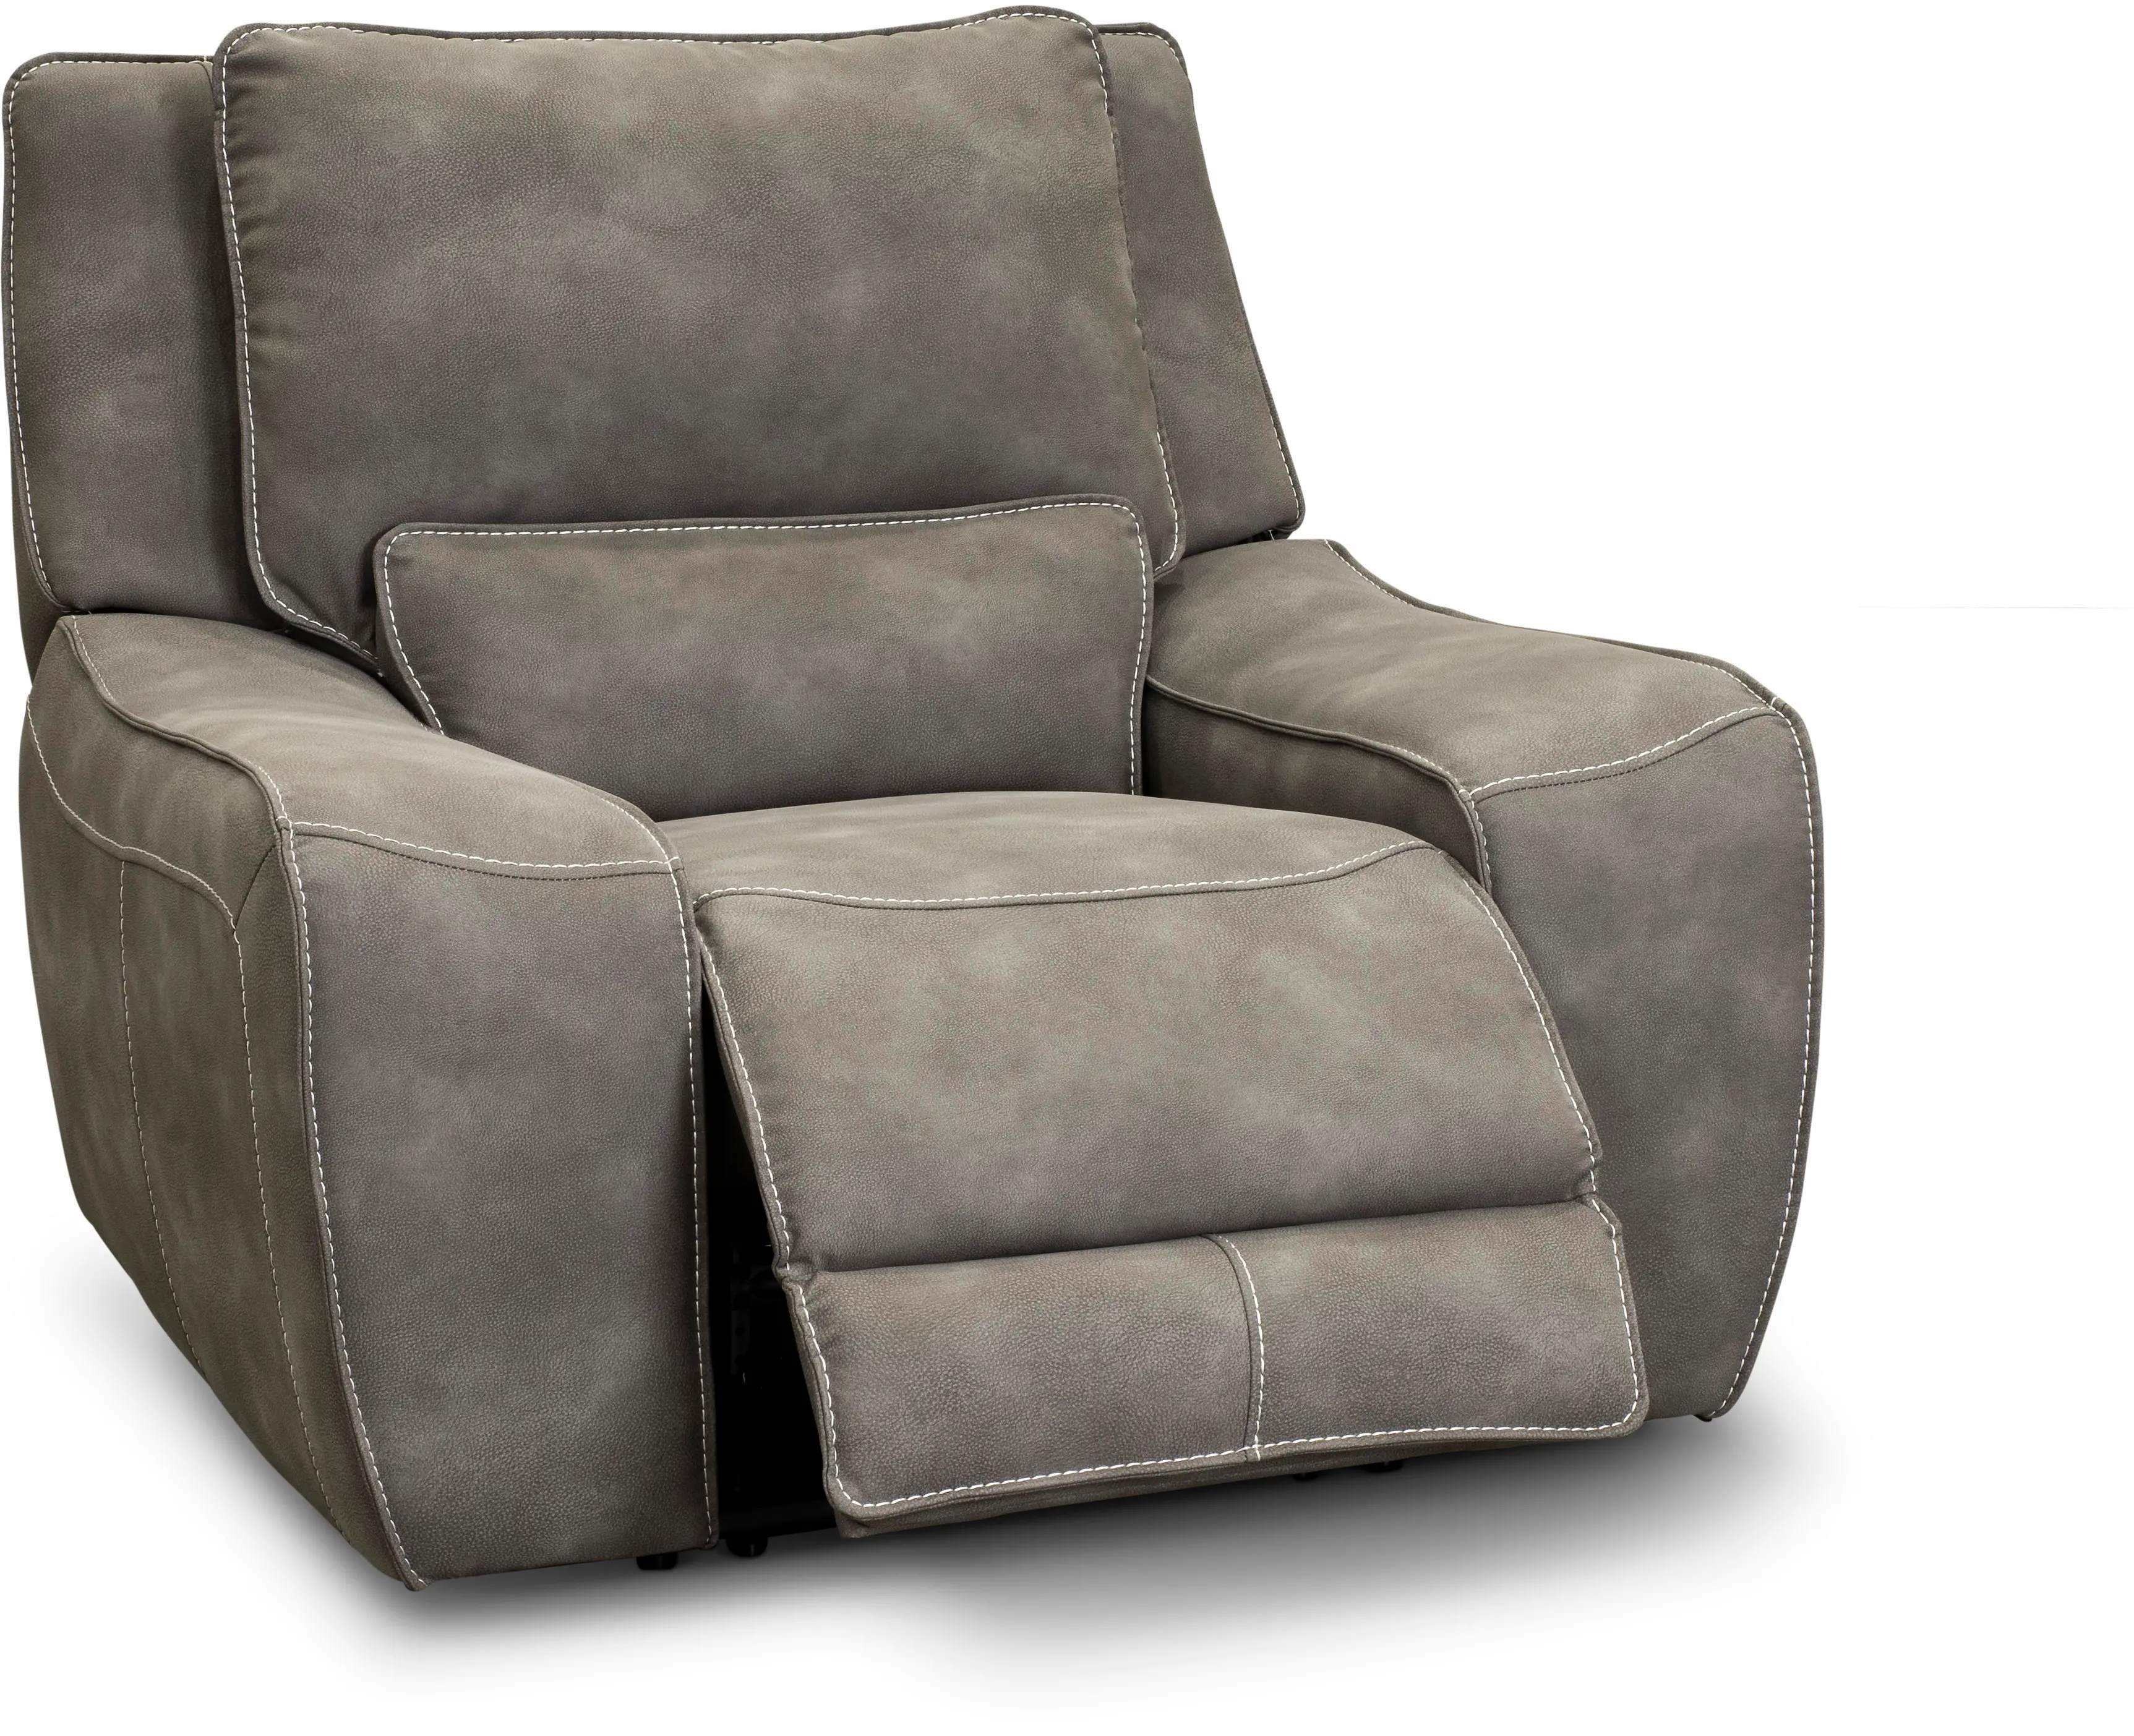 Sauvage Charcoal Gray Power Recliner with Power Headrest